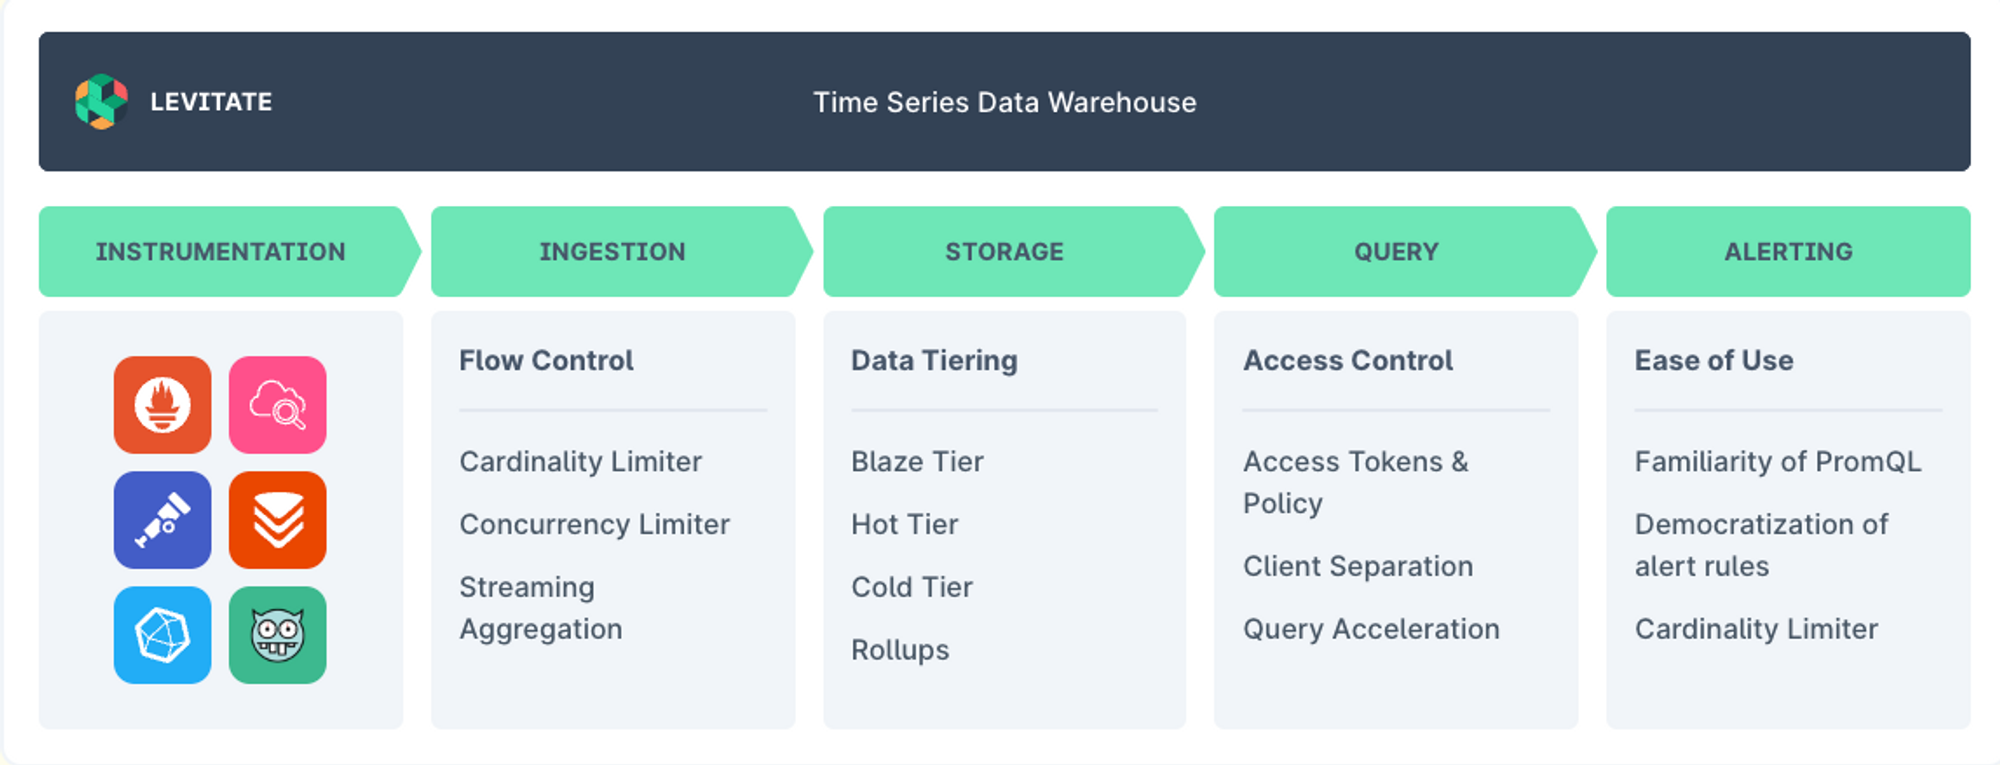 Levitate - A managed time series data warehouse